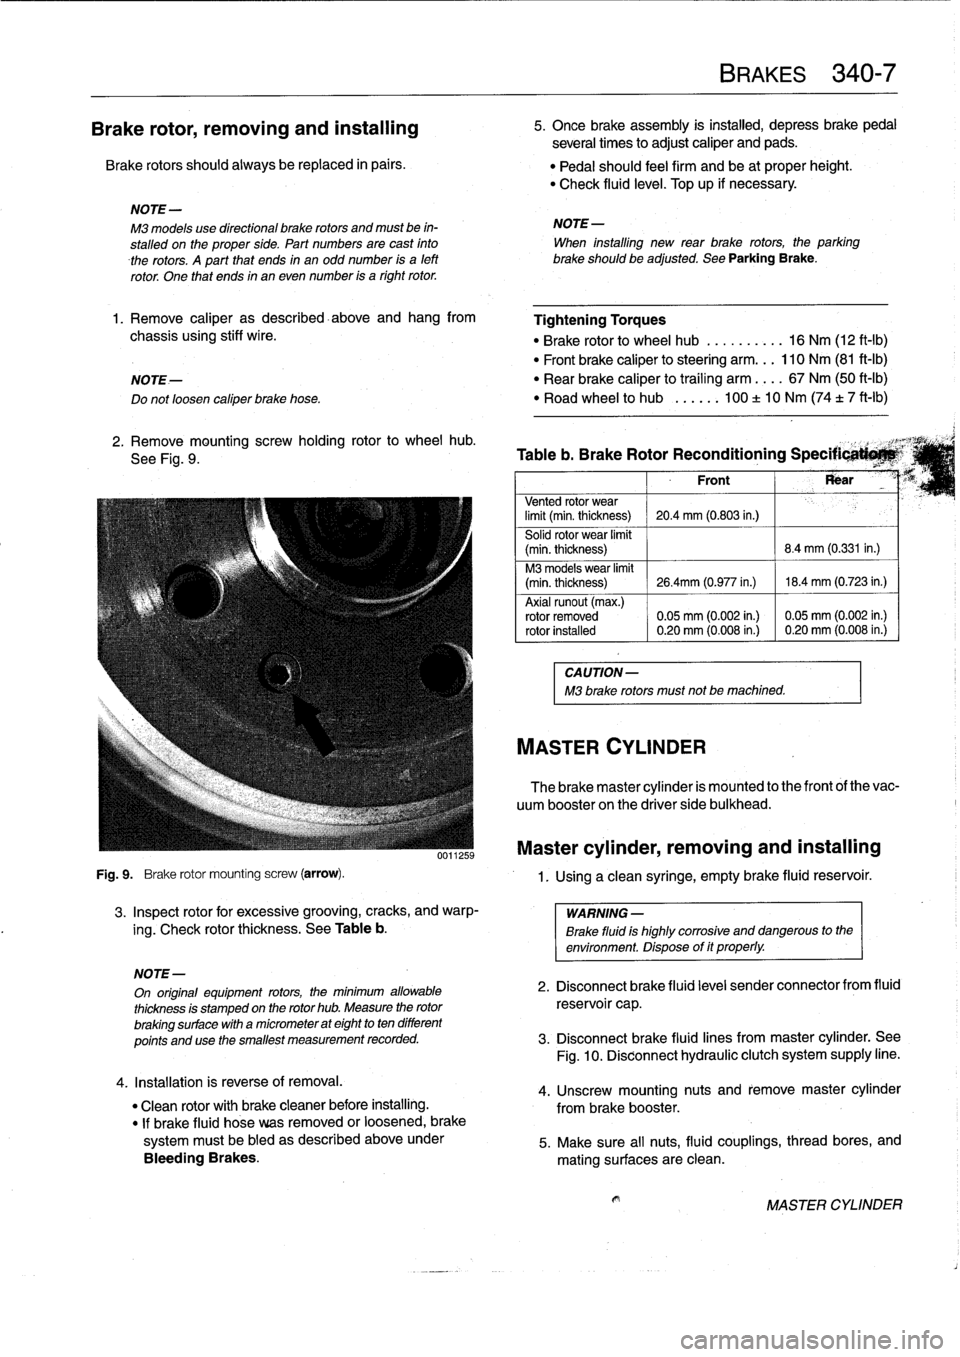 BMW 328i 1997 E36 Owners Guide 
Brake
rotor,
removing
and
installing

Brake
rotors
shouldalways
be
replaced
in
pairs
.

Fig
.
9
.

	

Brake
rotor
mounting
screw
(arrow)
.

3
.
Inspect
rotor
for
excessive
grooving,
cracks,
and
warp-